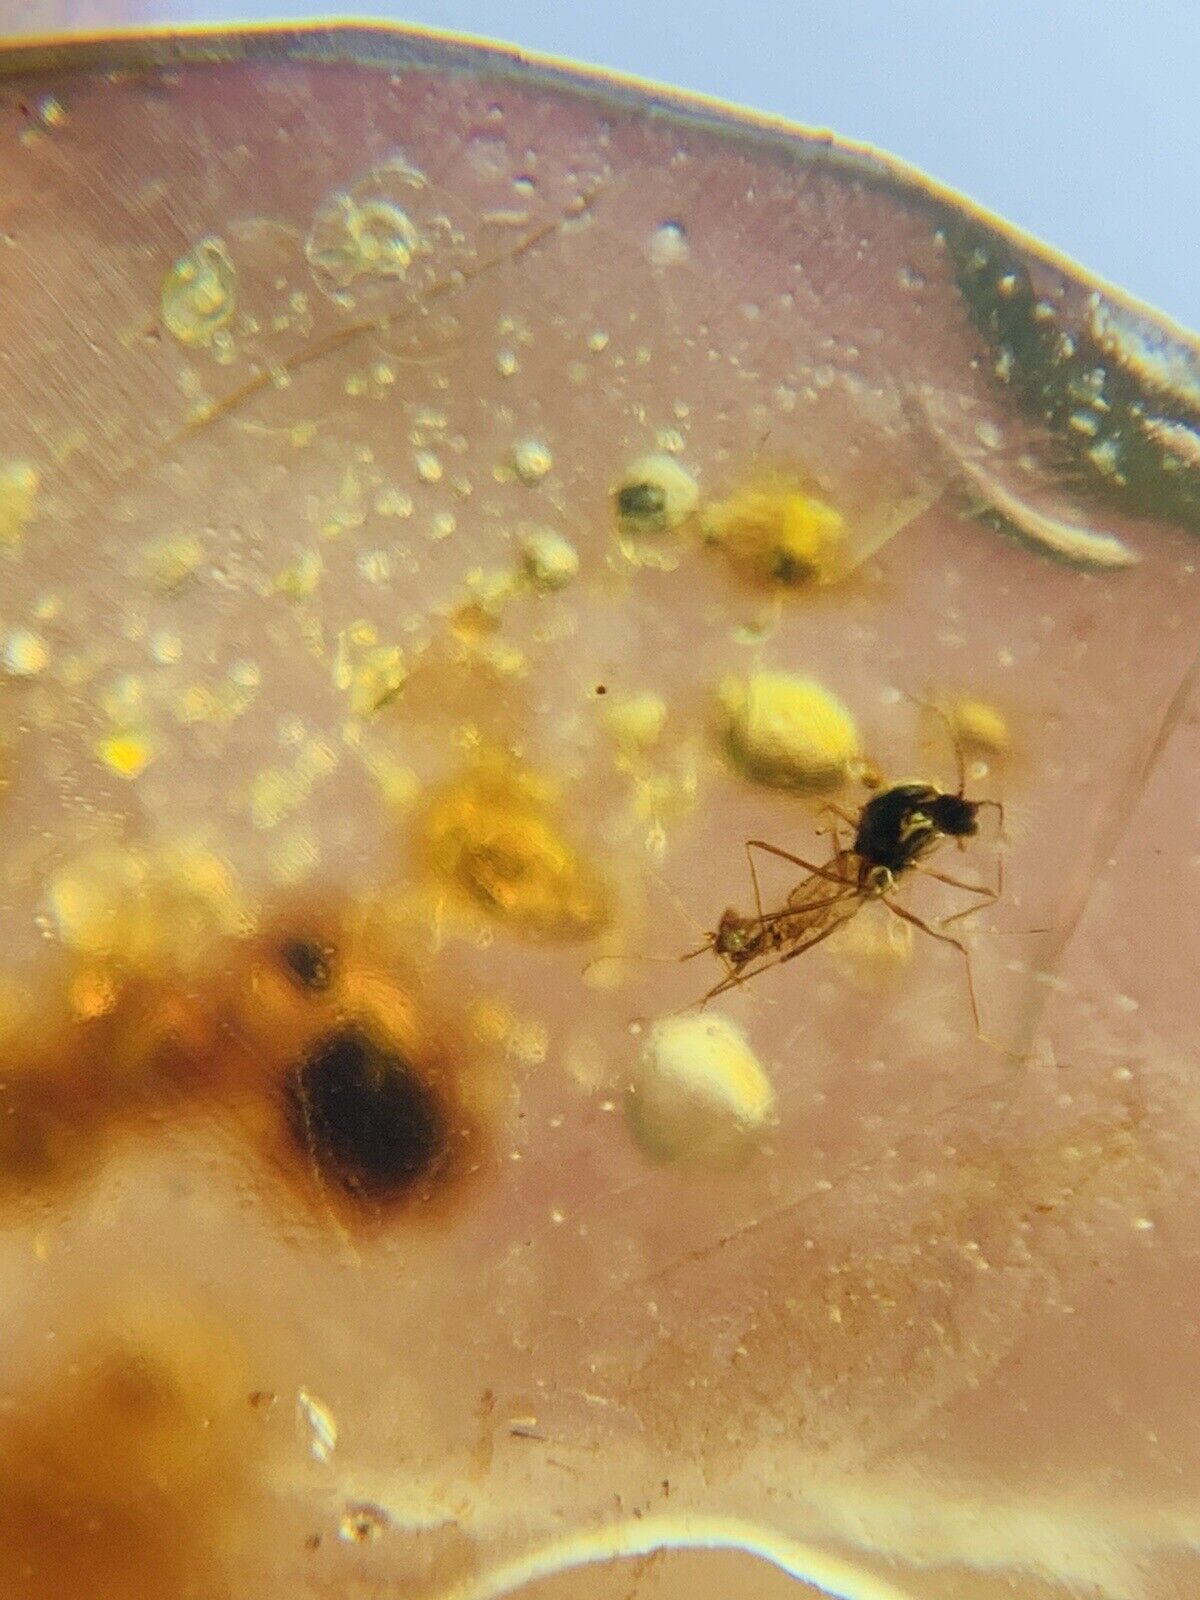 Diptera Mosquito Fly Burmite Myanmar Burmese Amber insect fossil dinosaur age